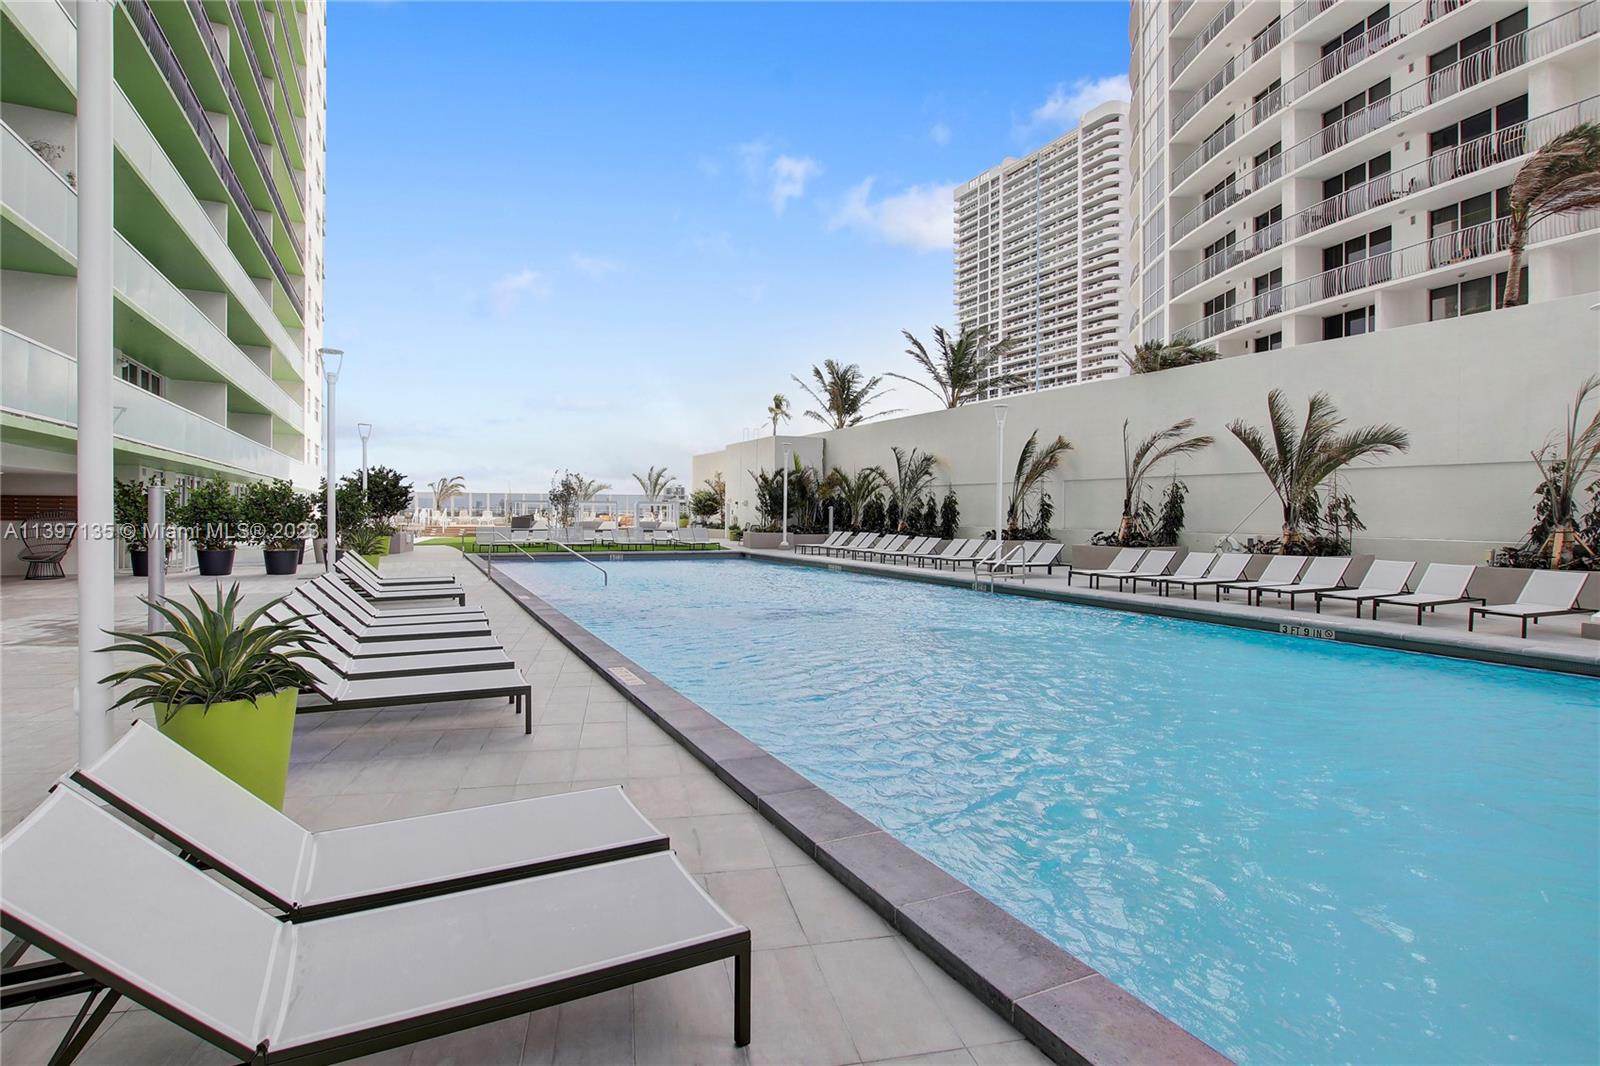 AVAILABLE 06/11 (UNIT CAN'T BE SHOWN TILL AVAILABLE DATE). Photos may be from another floor, but are the same line. The Bay Parc community is walking distance of downtown Miami's many wonderful attractions. Bay Parc features newly renovated amenities and common areas, a variety of floor plans with granite countertops, SS appliances, hardwood floors. Move in cost are 1st month + $1K deposit. Parking is $100 p/m. SAME DAY APPROVAL! (NOTE: Rental rates are subject to change depending on move-in date and lease term. Advertised rate is best rate and maybe on leases longer than 12 months. Proof of income greater than 3x 1 month's rent is required and minimum credit score of 620 or higher in order to be approved).